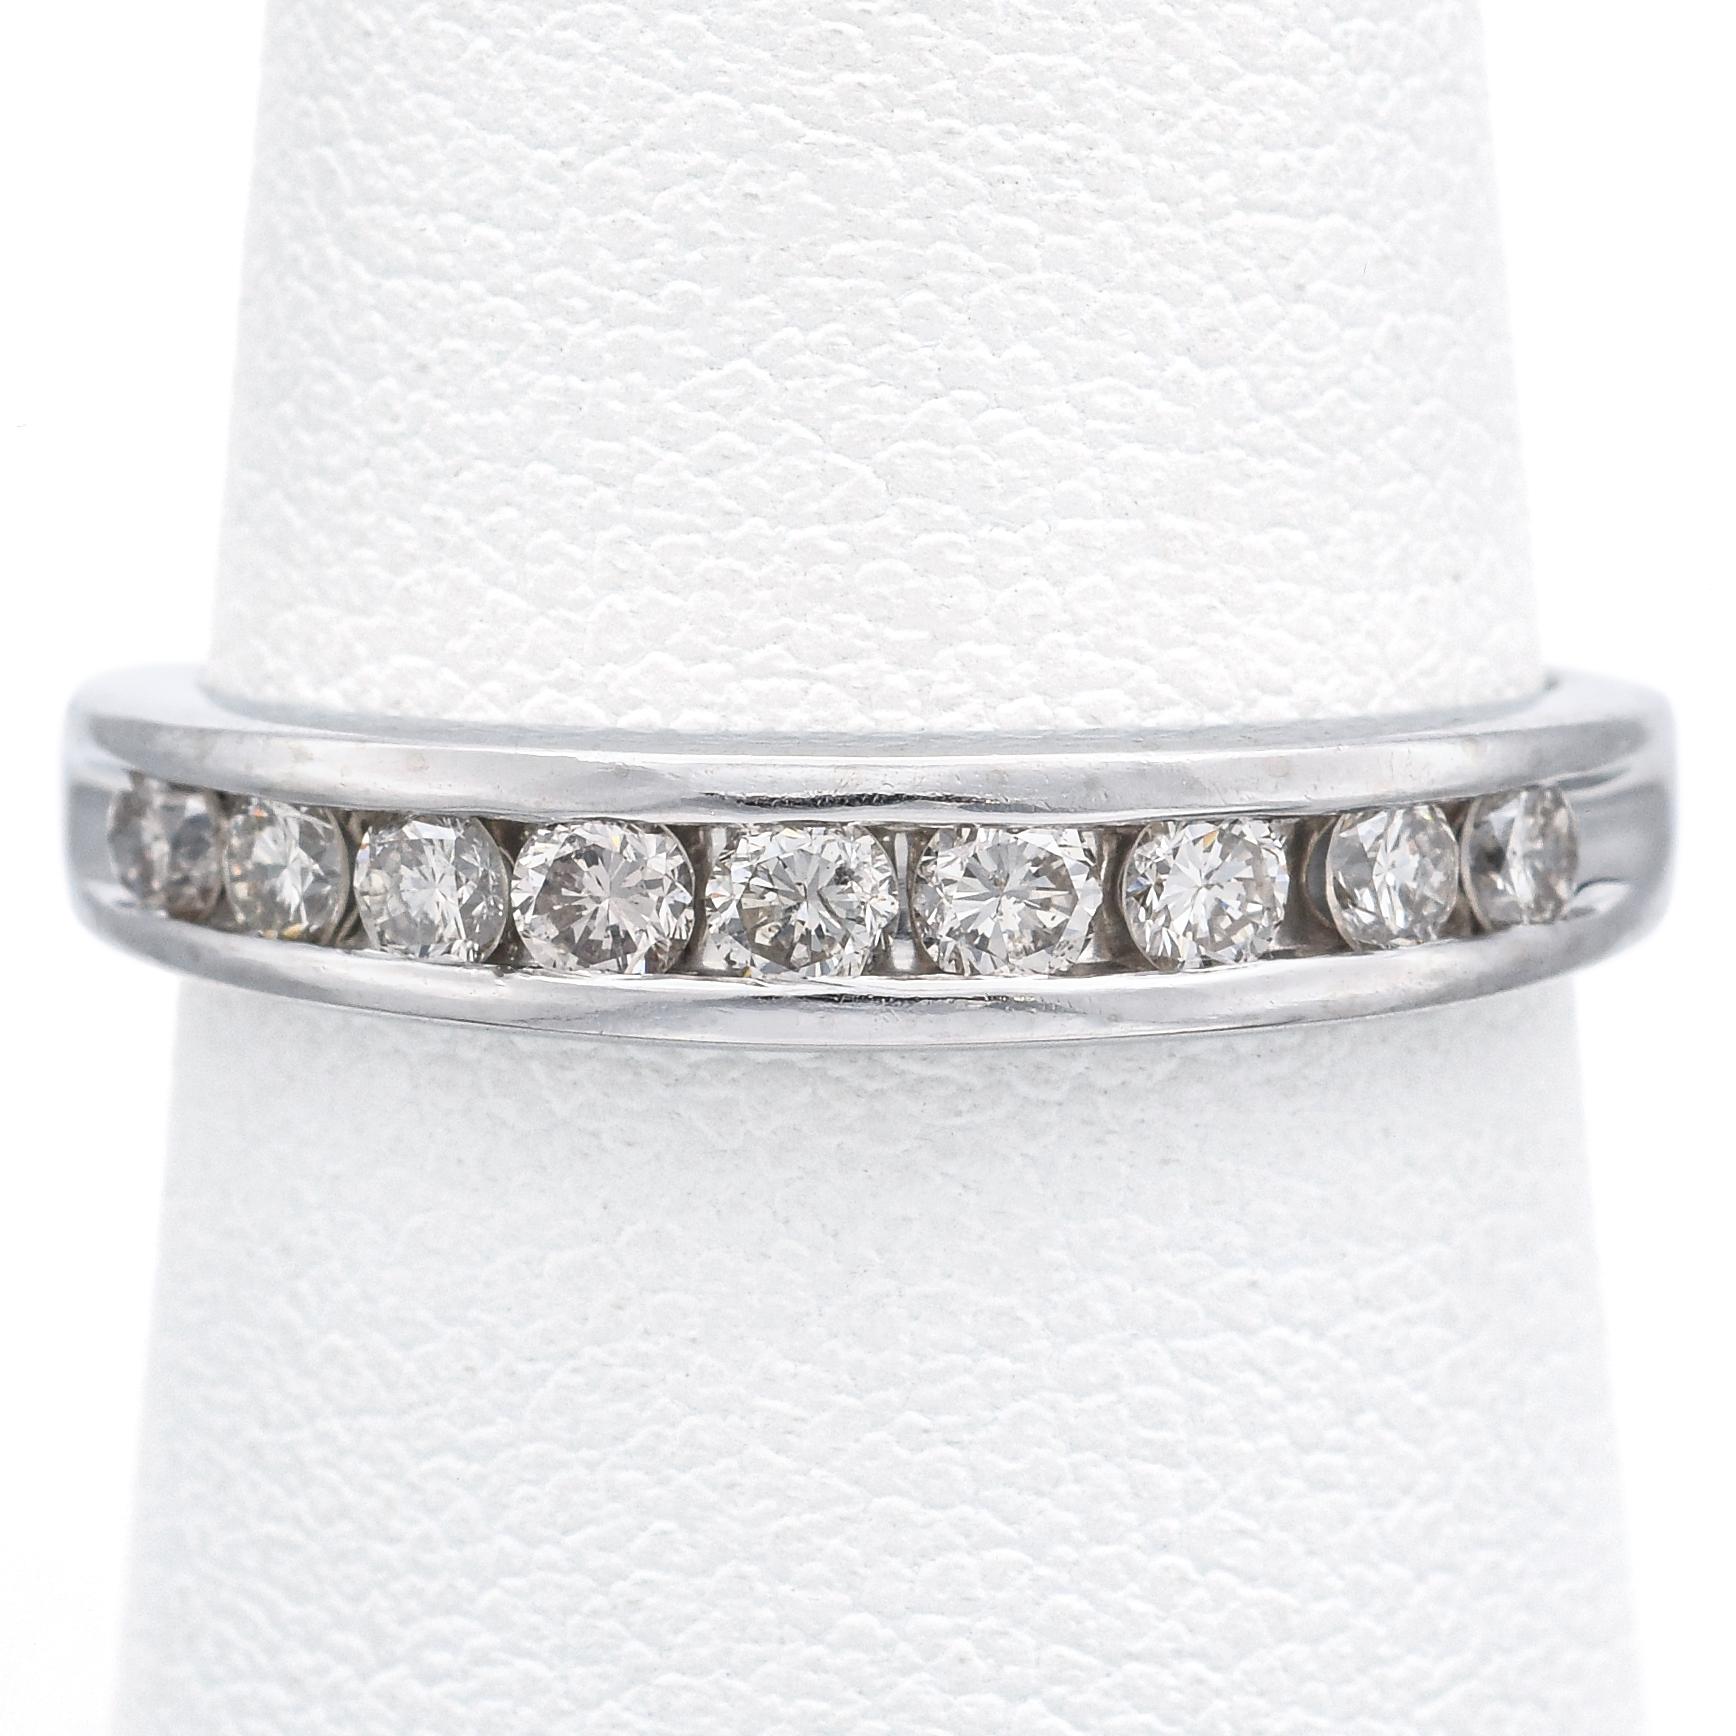 Weight: 4.2 Grams
Stone: Approx. 0.54 TCW (0.06 ct) Diamonds
Face of Ring: 21.5 x 4.0 x 2.3 mm
Ring Size: 7.75
Hallmark: Pt950

ITEM #:BR-1080-102423-06